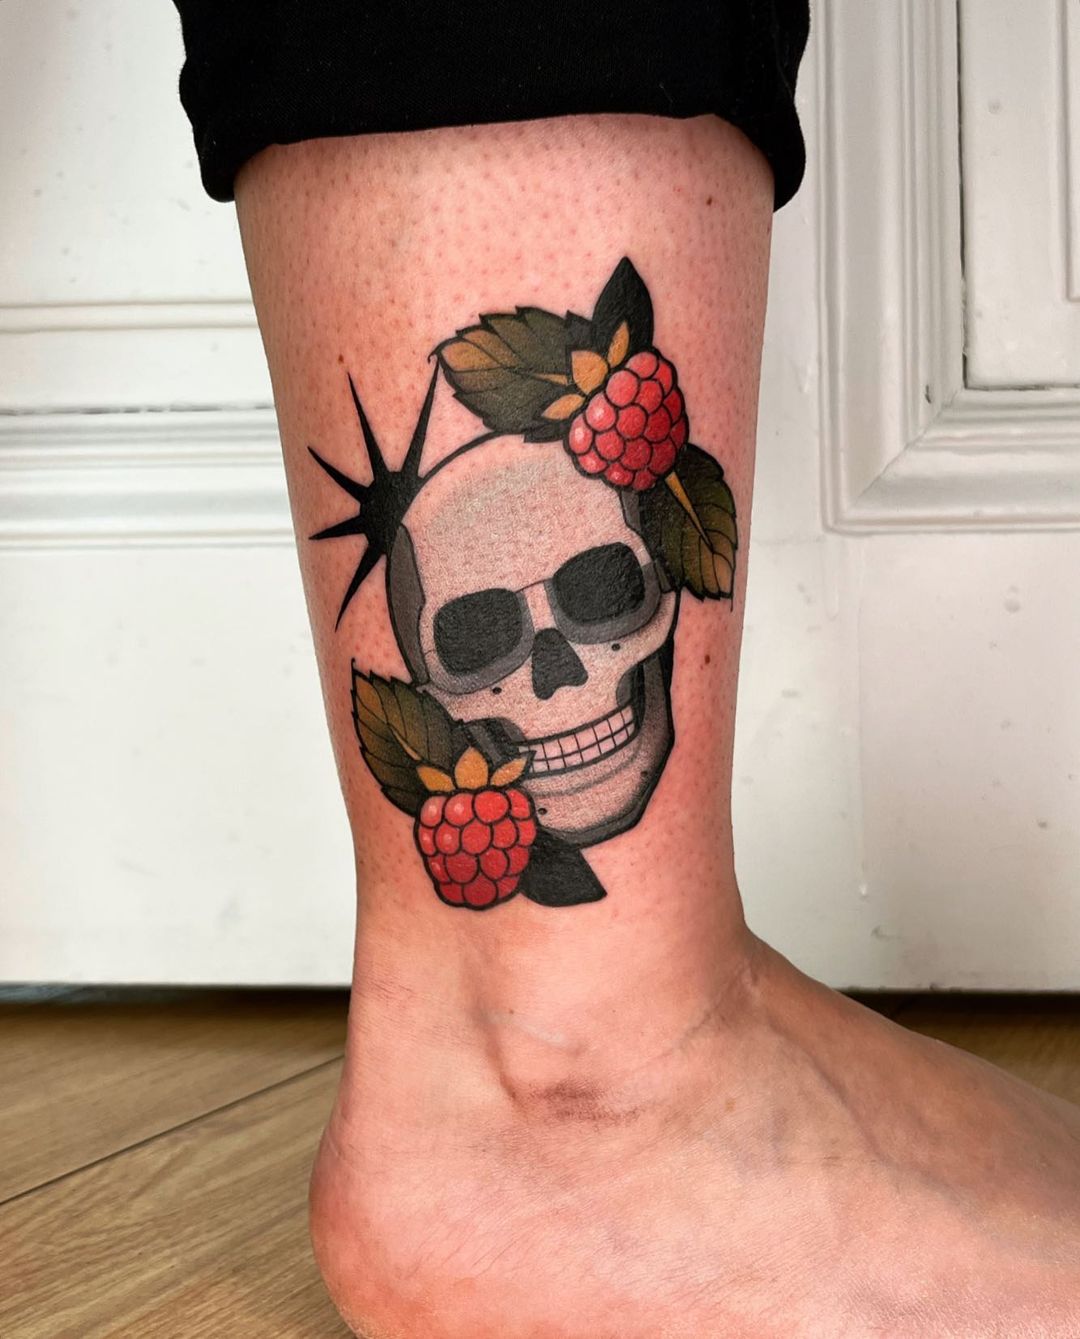 Berry Adorned Tattoo Of A Skull